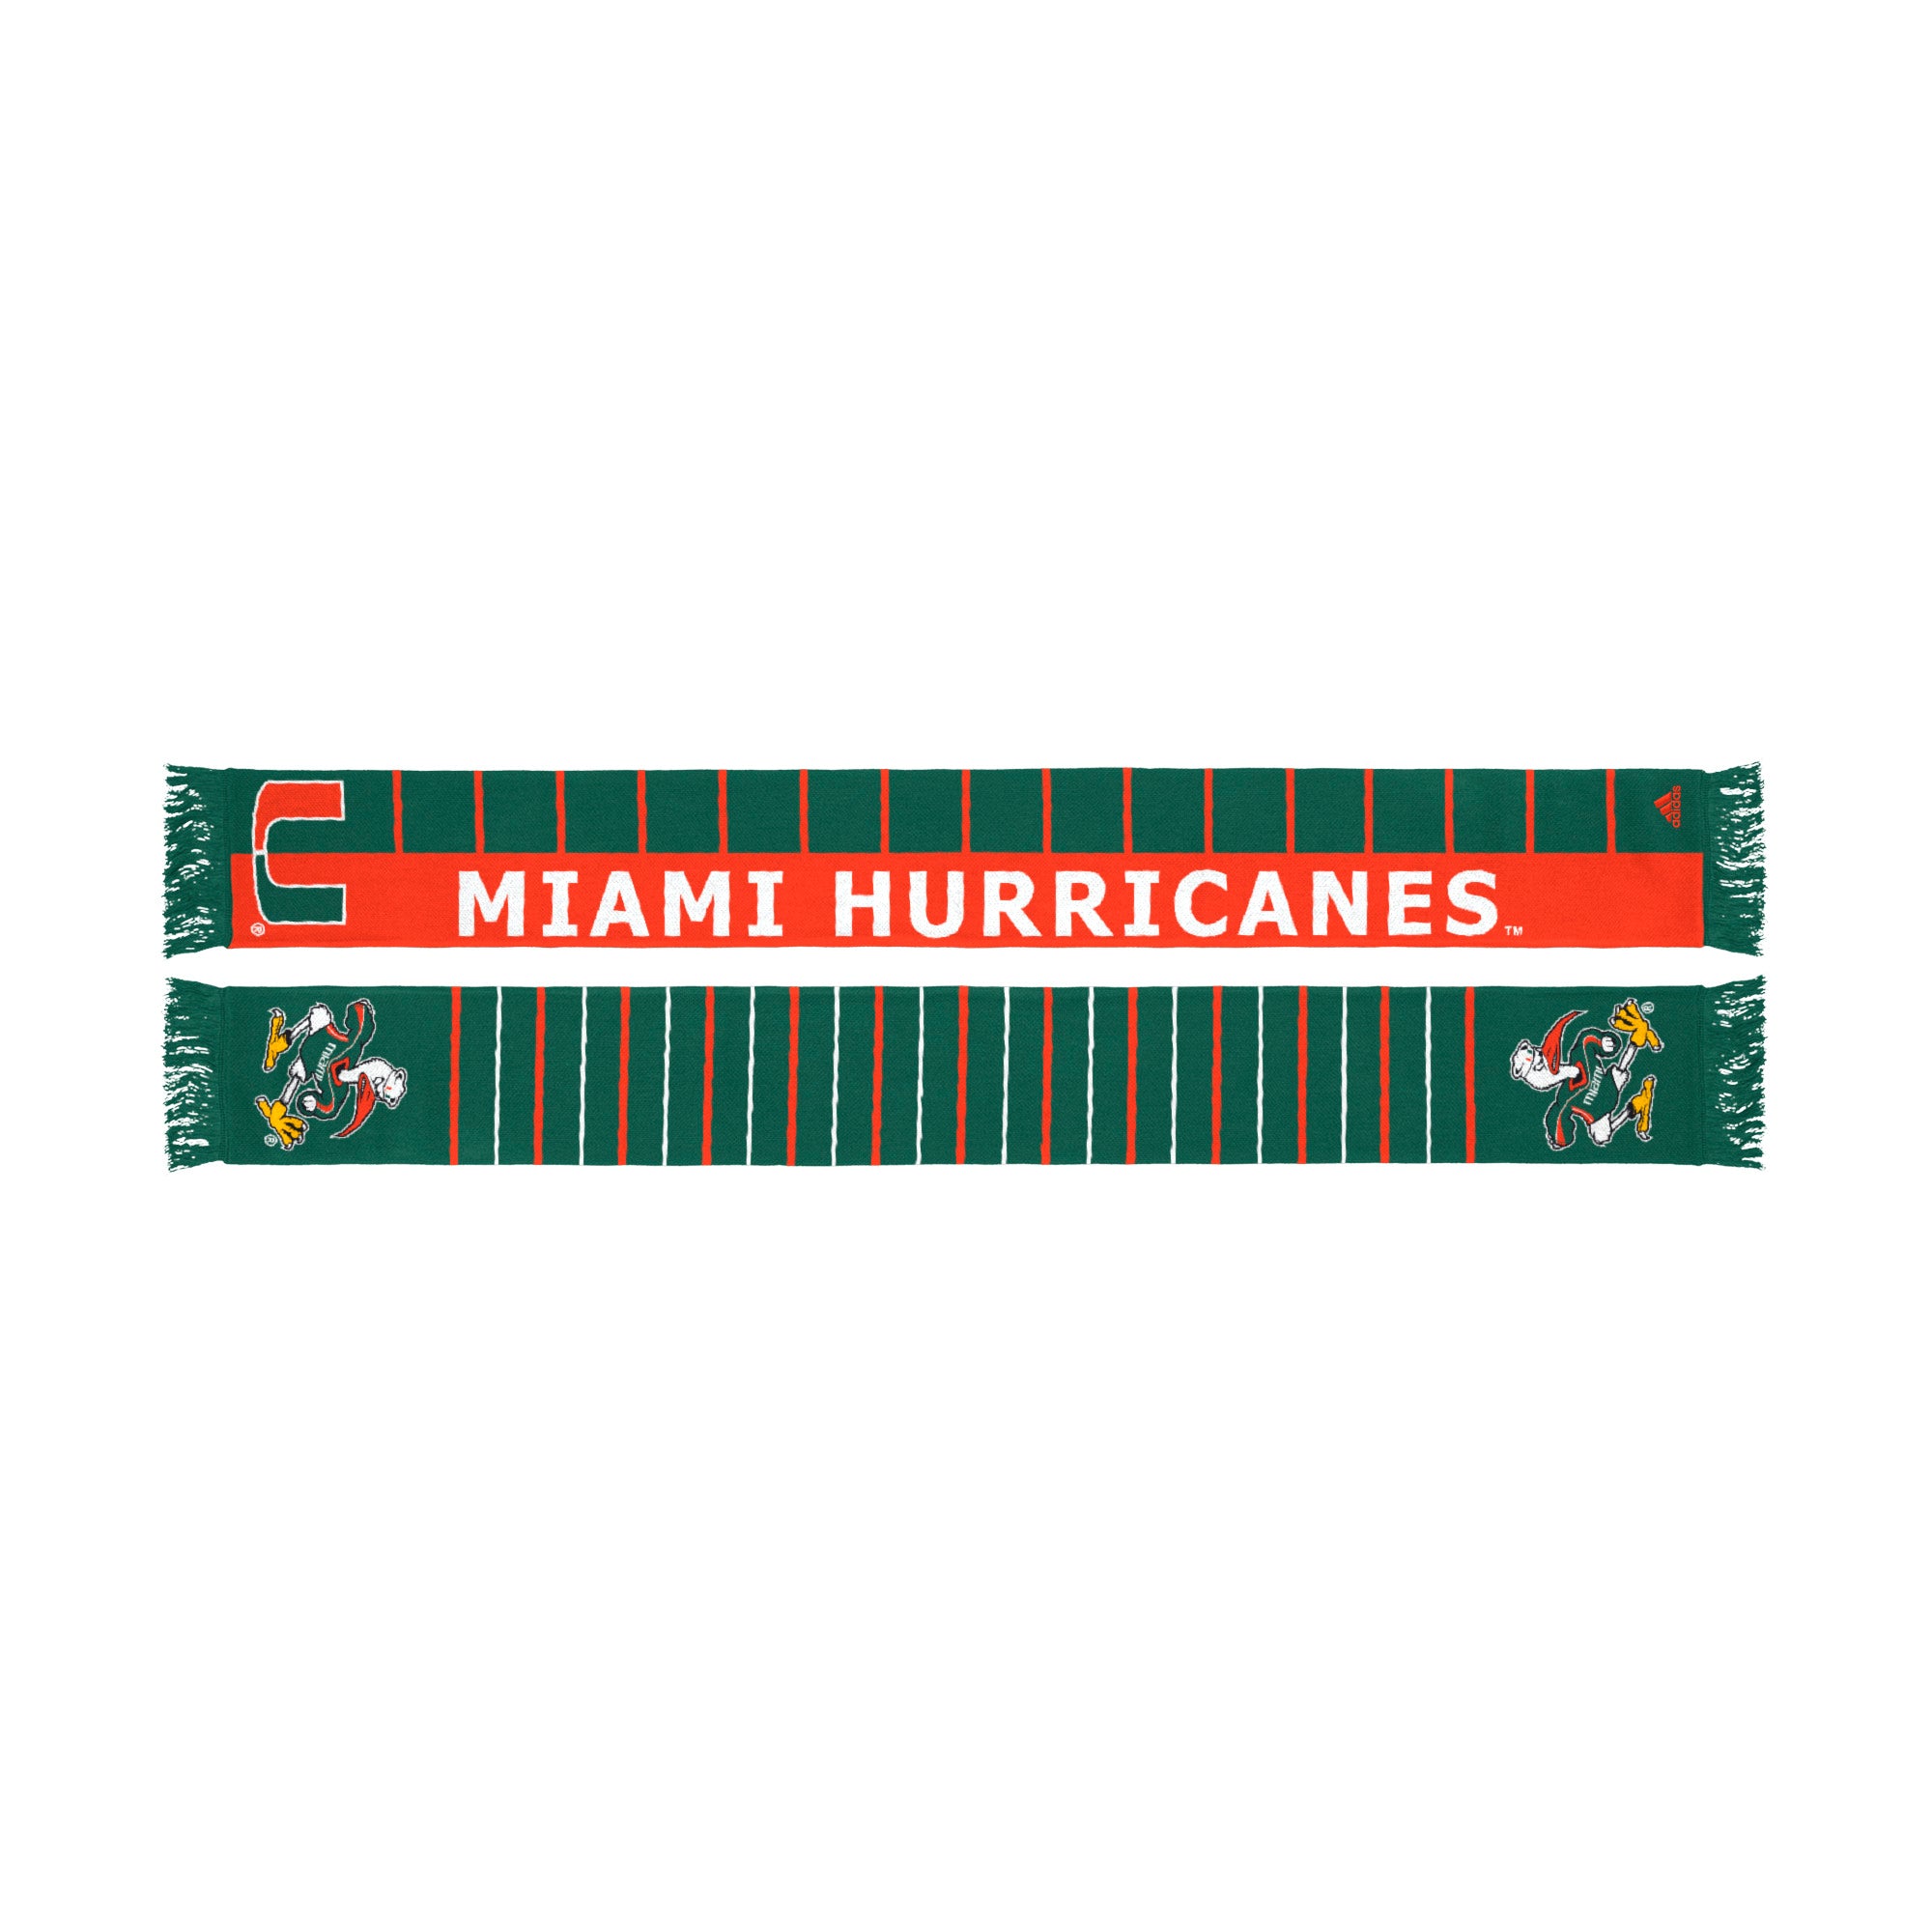 Miami Hurricanes adidas Two sided Scarf - Green